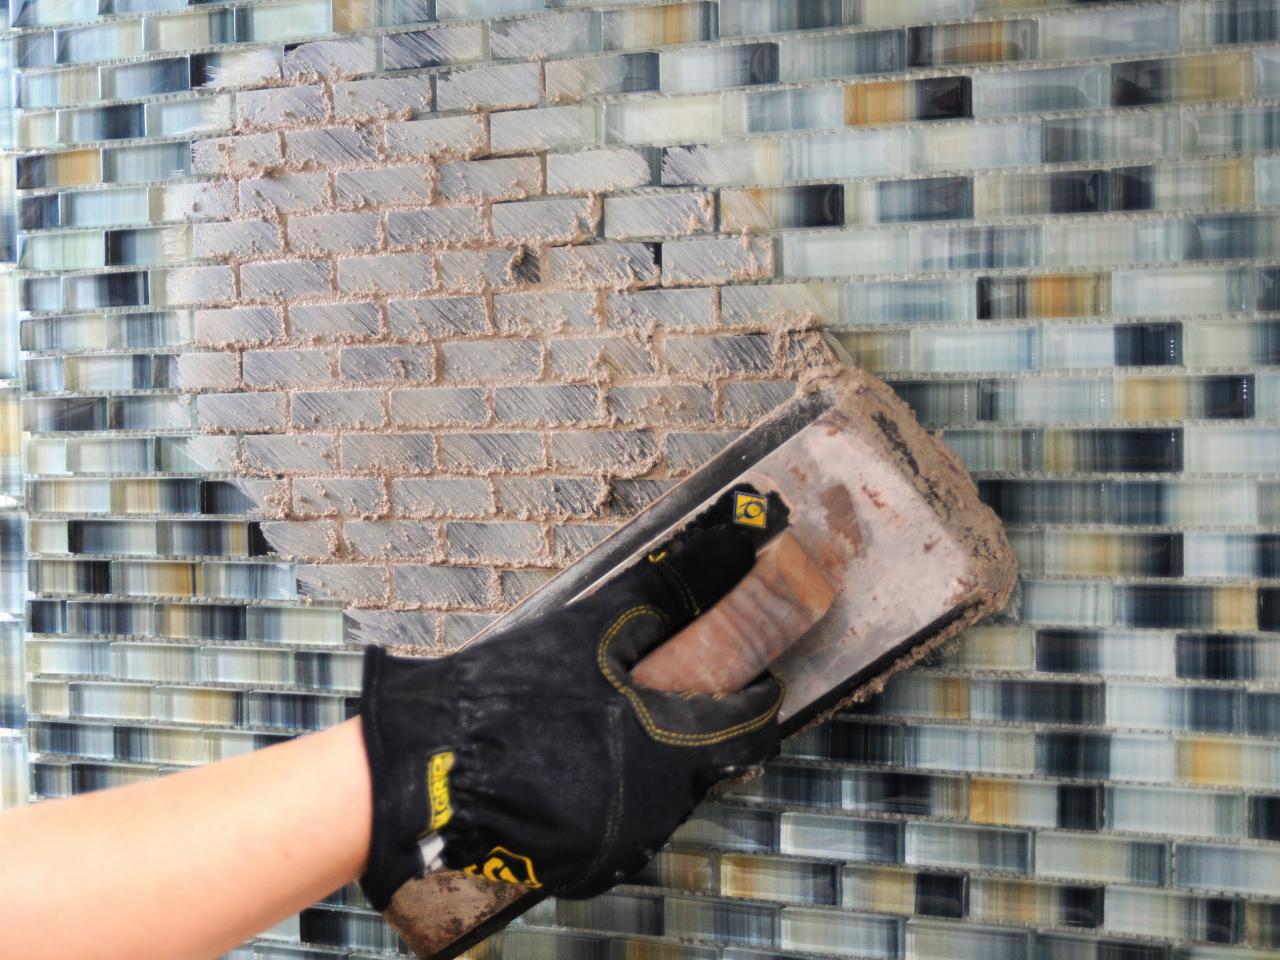 How To Install A Tile Backsplash, How To Calculate Much Subway Tile I Need